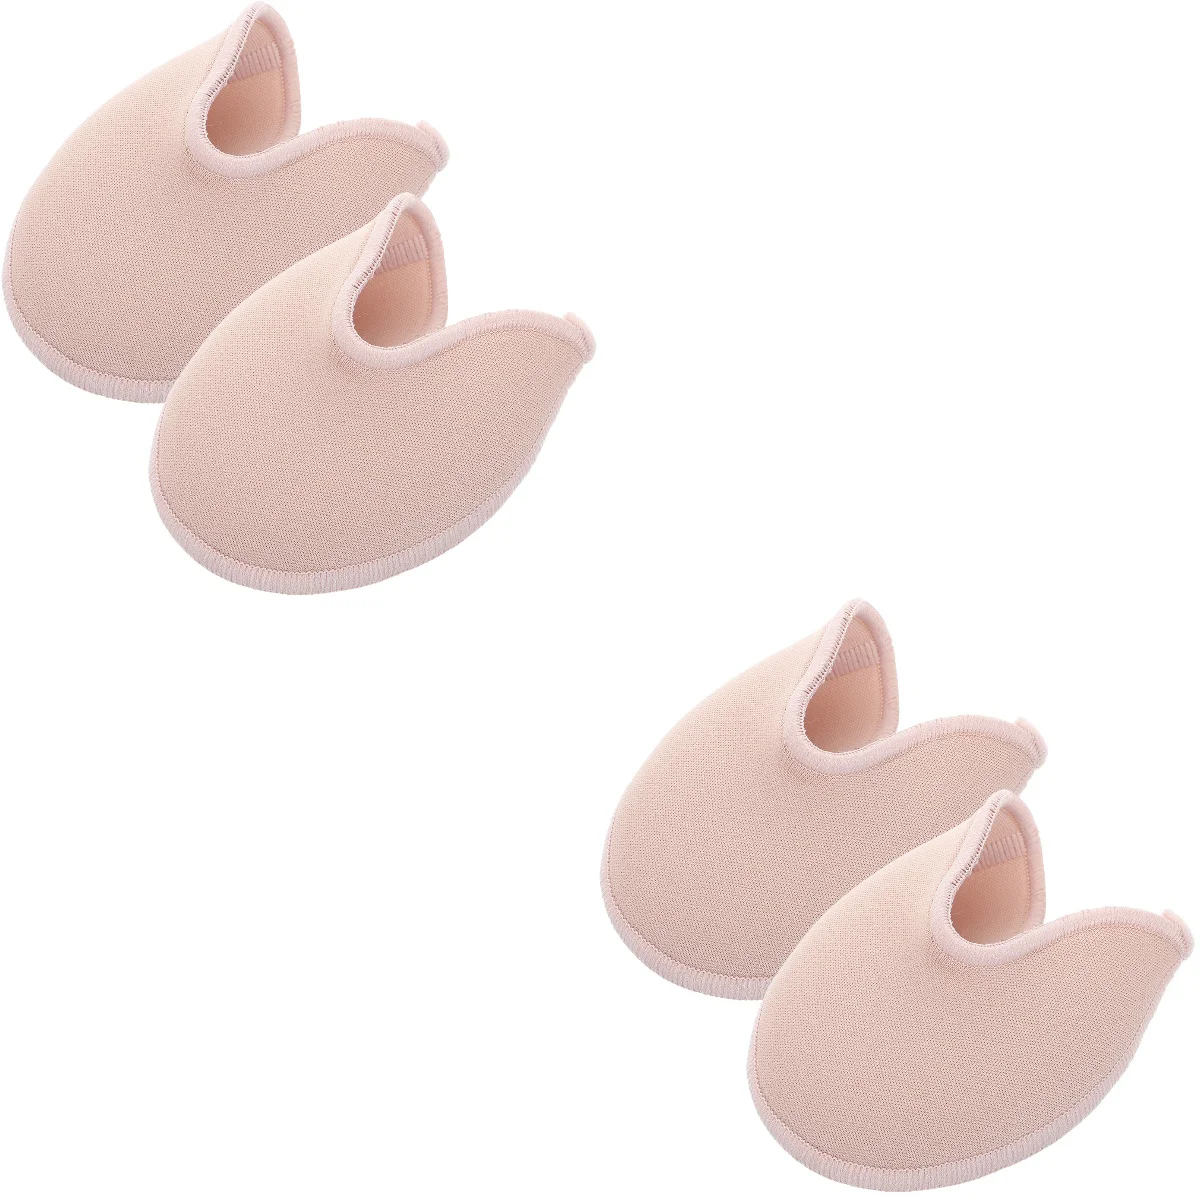 

2 Pairs Ballet Pointe Set High Heel Toe Pads Cover Shoes Protector Short Foot Caps Sebs Covers Women Miss Cushion